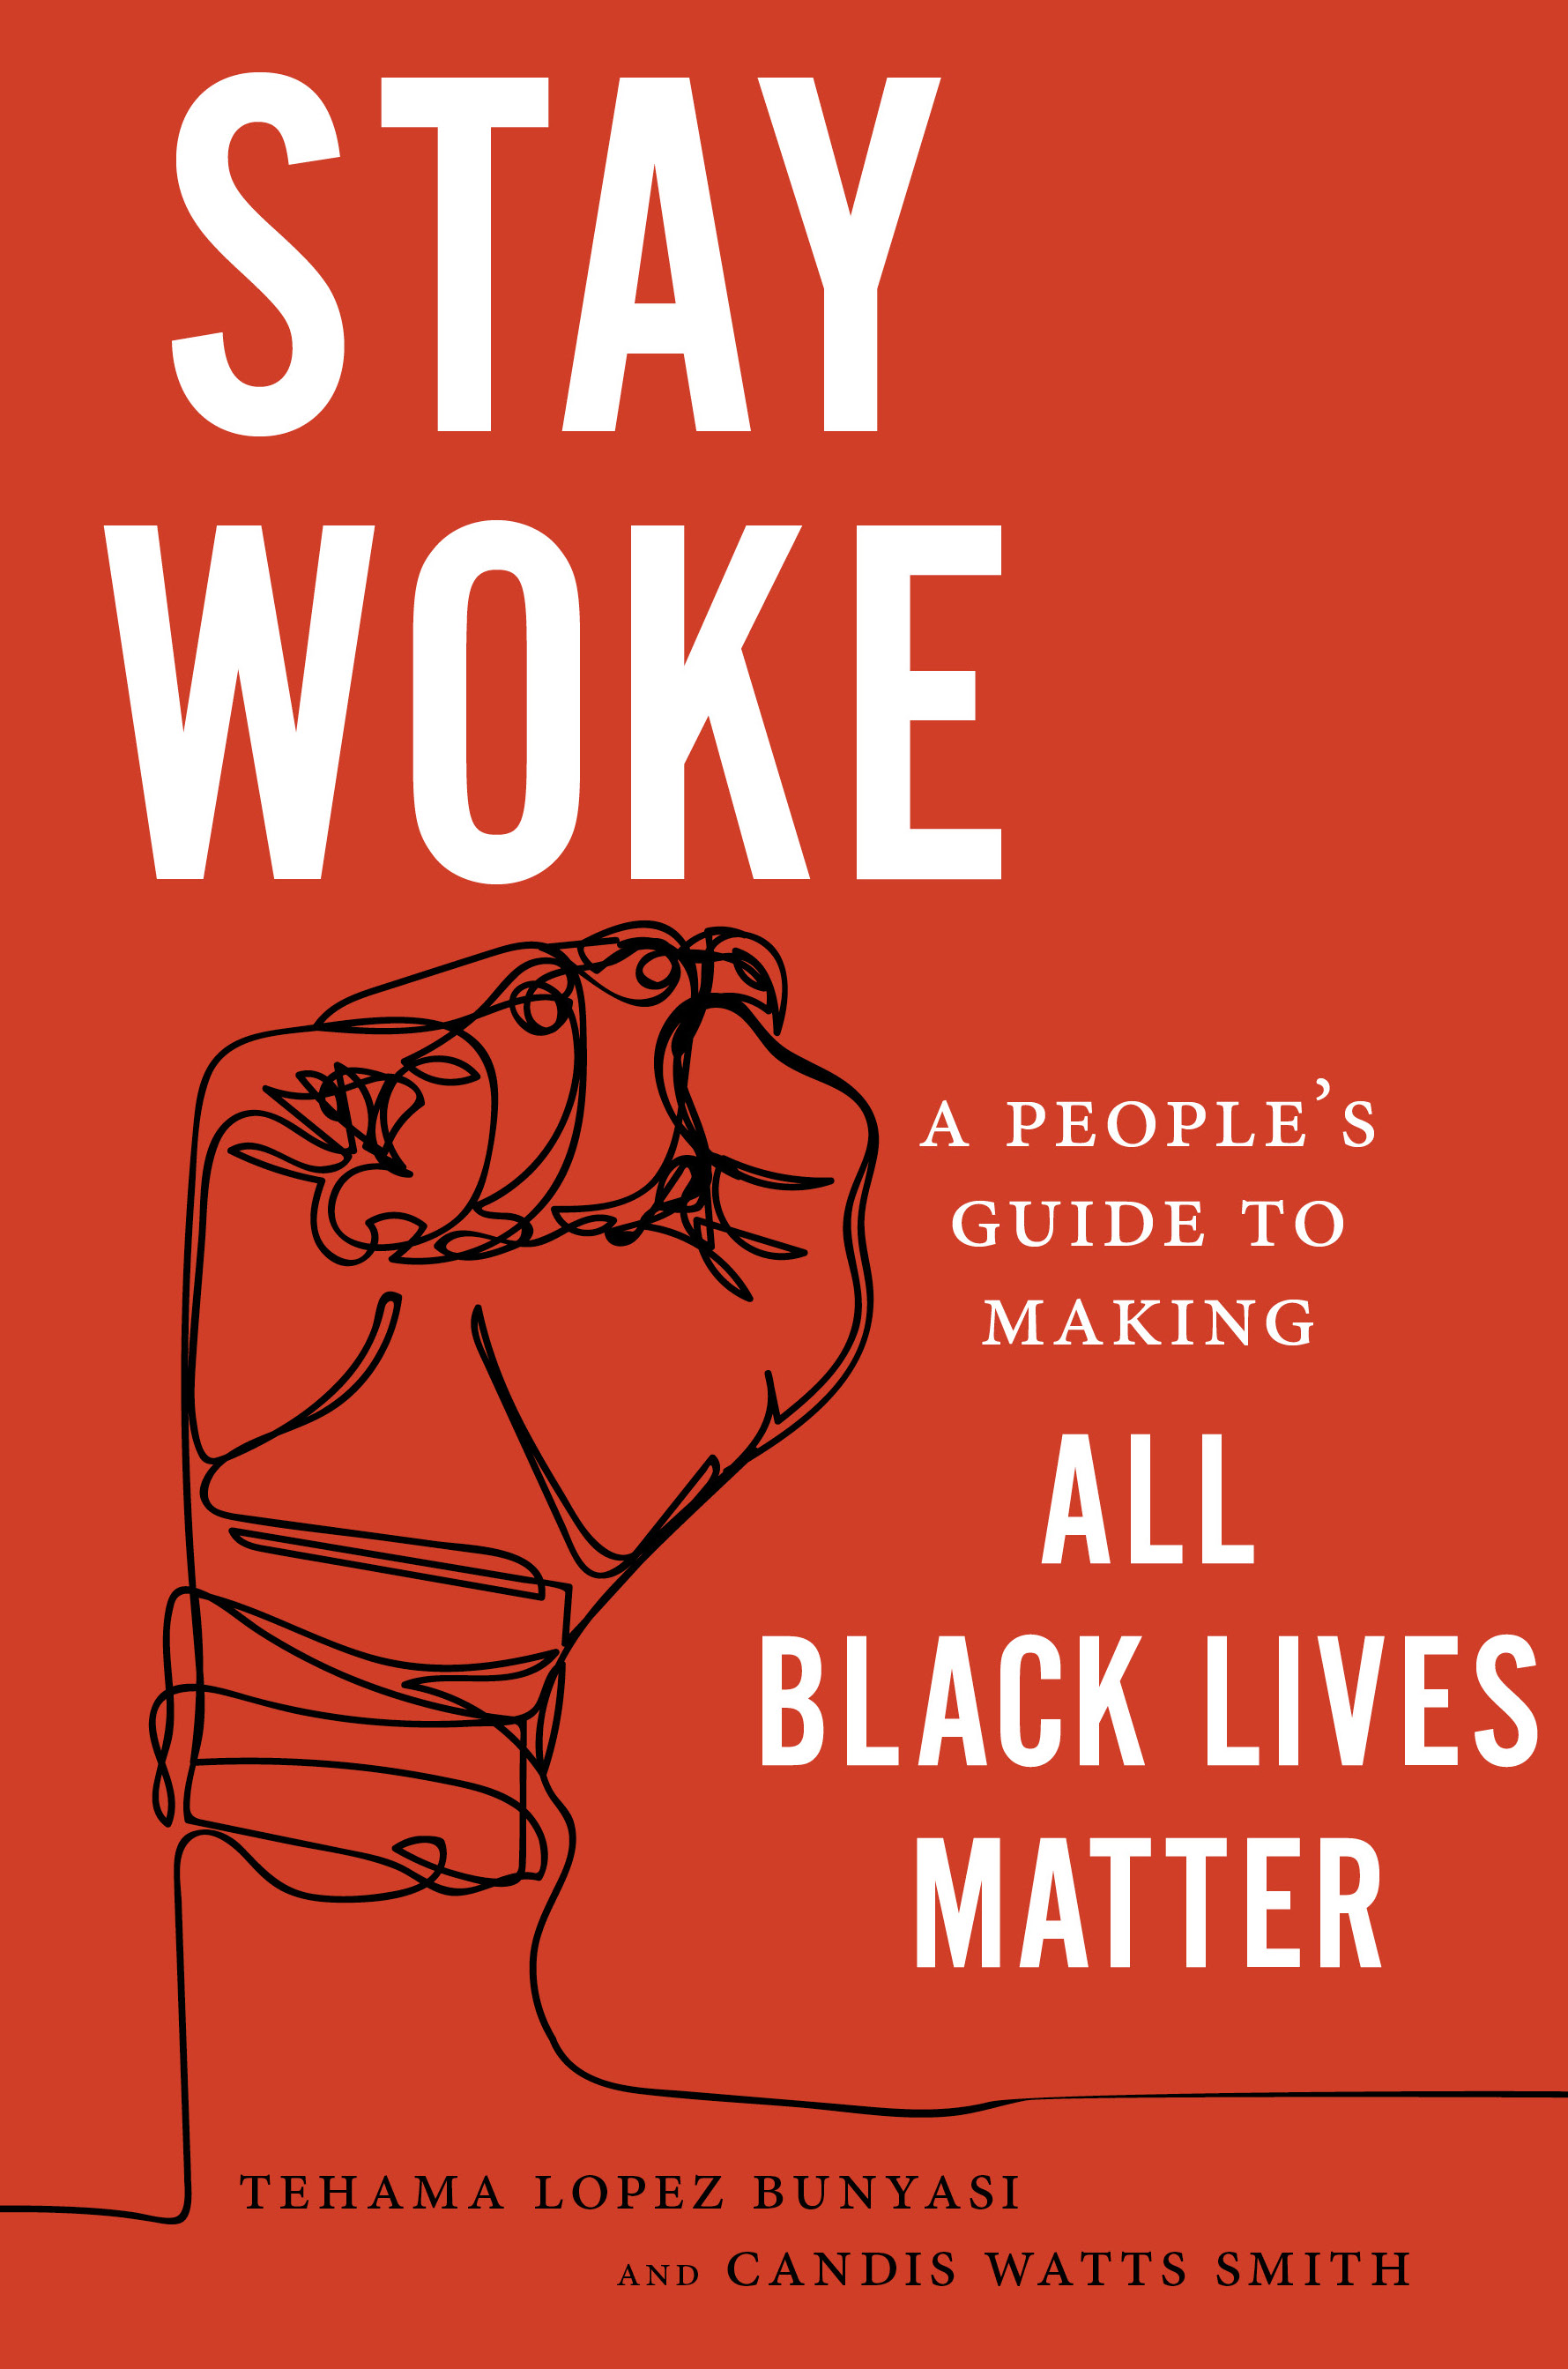 Book cover with a hand-drawn clenched raised fist on a red background.